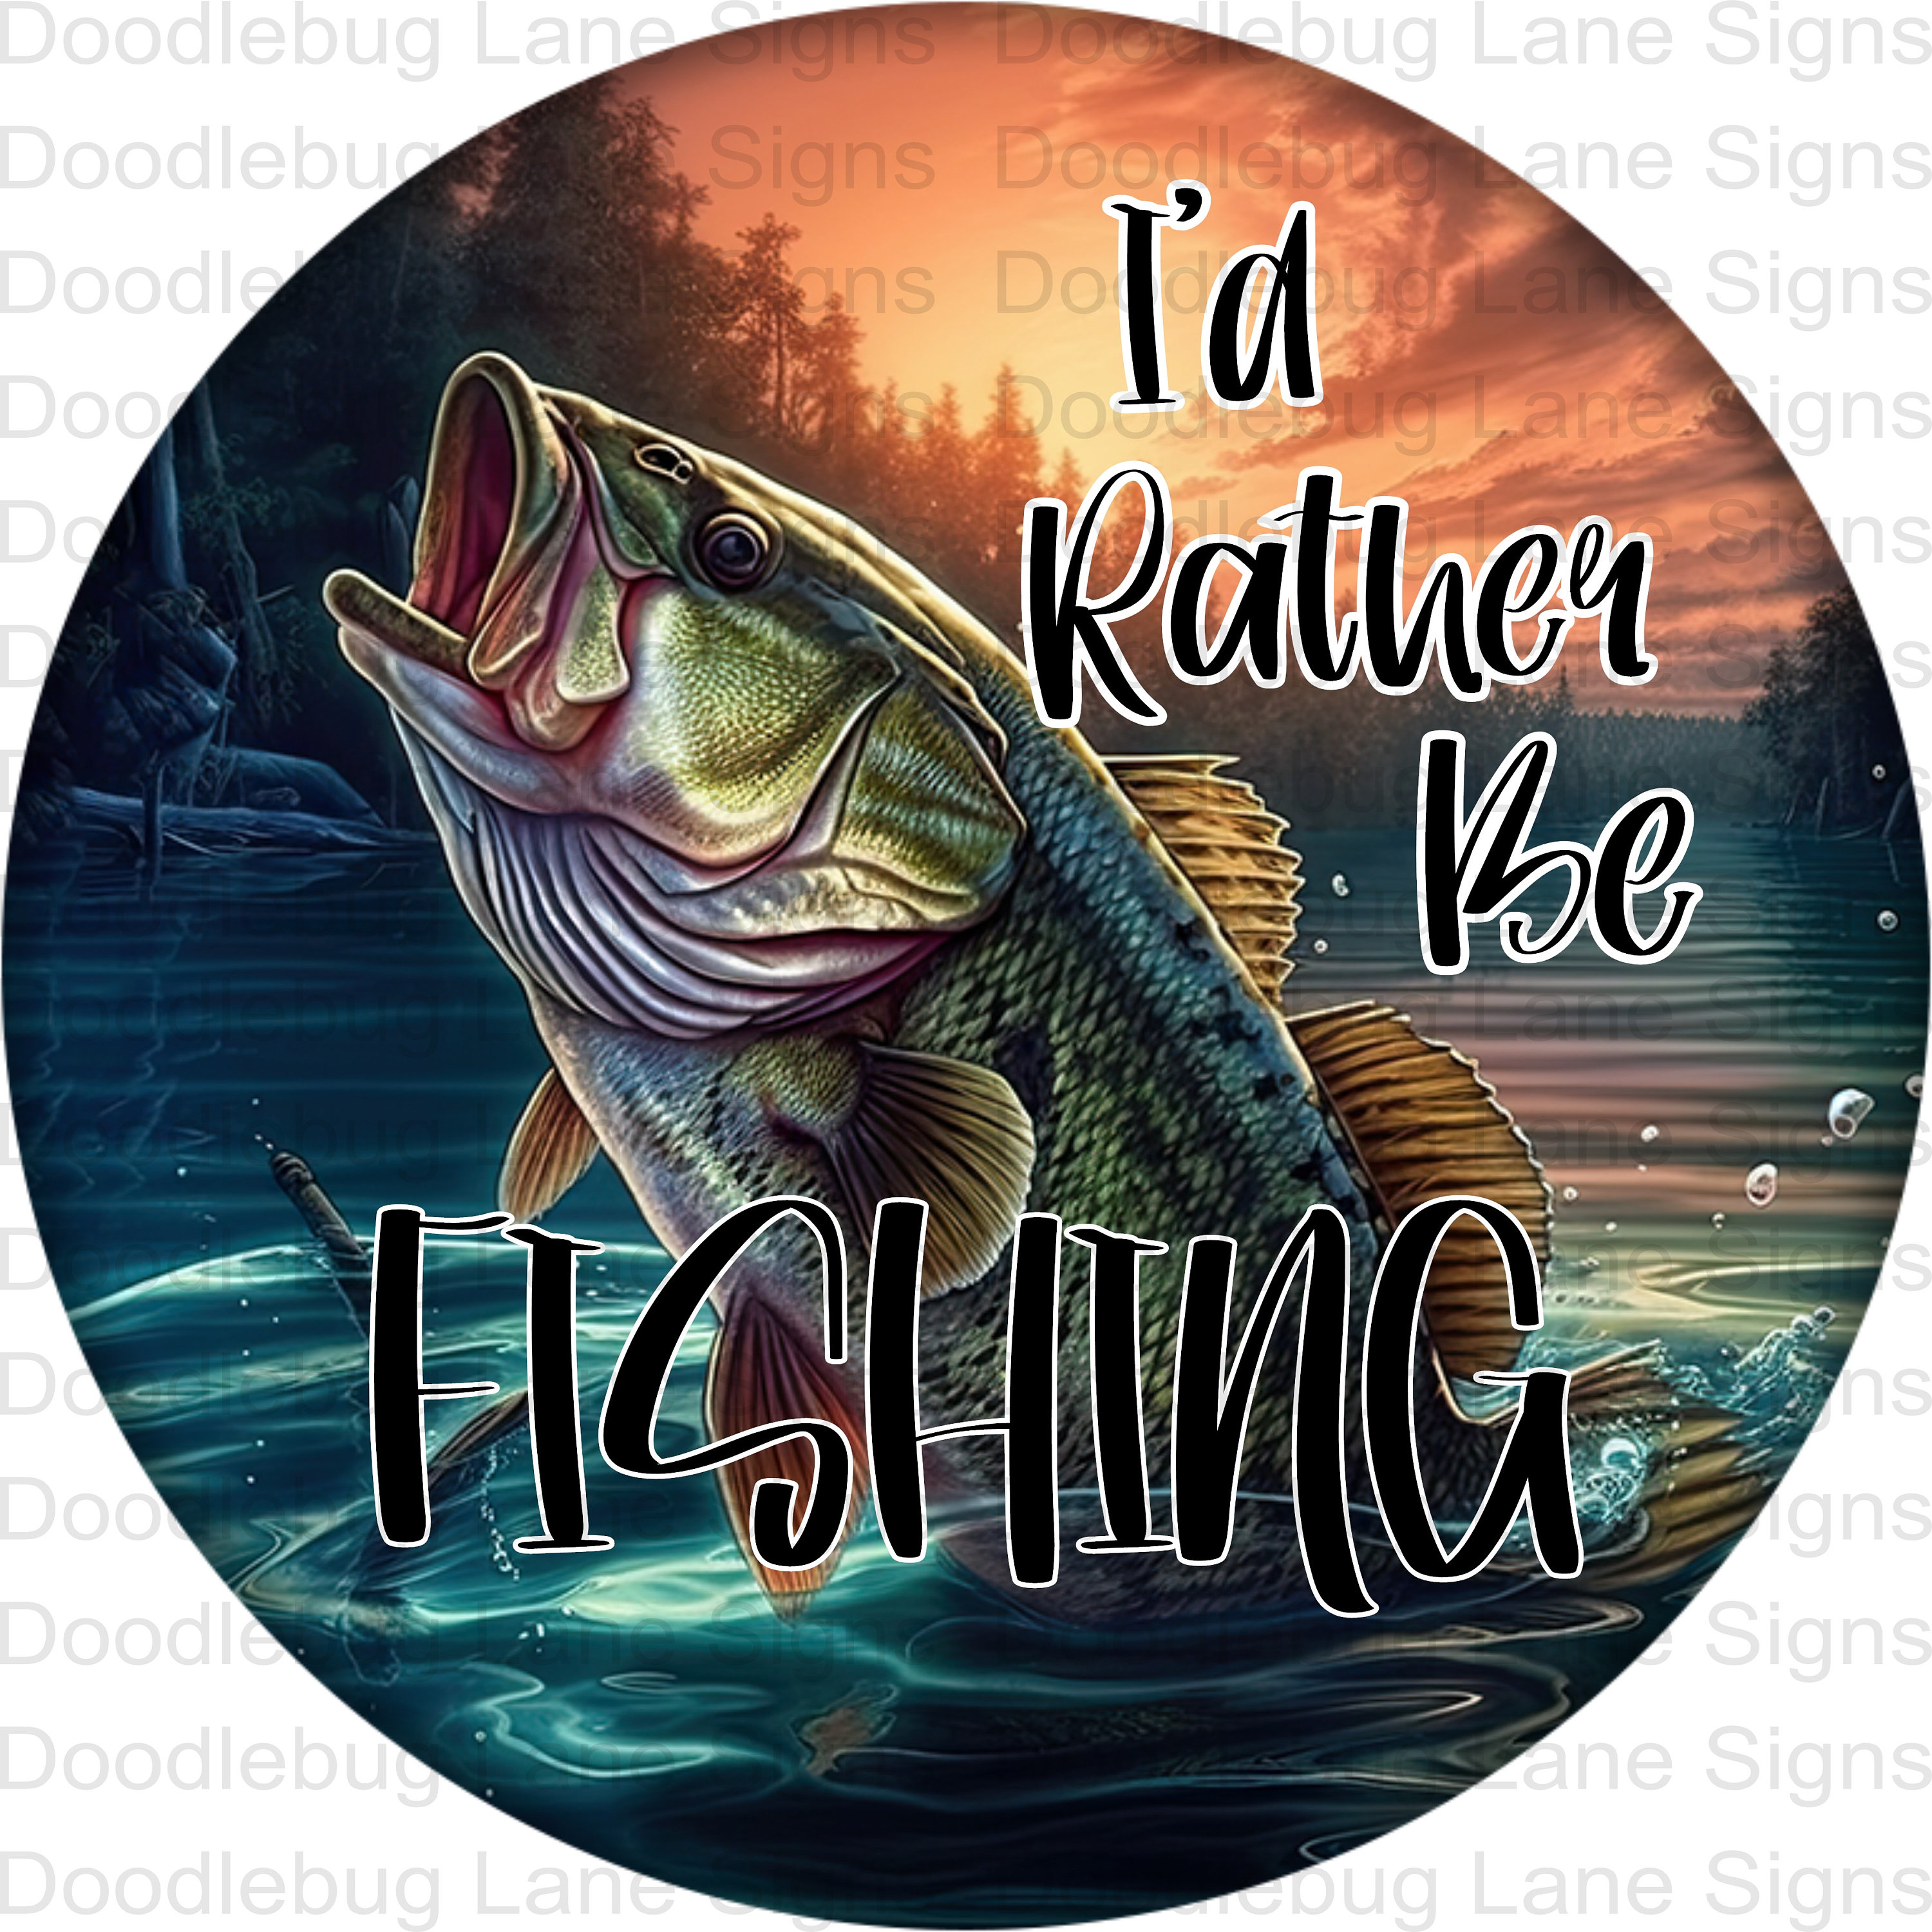 I'd Rather Be Fishing Wreath Sign-fish Sign-man Cave Sign-round Wreath  Sign-metal Wreath Sign-doodlebug Lane Signs 